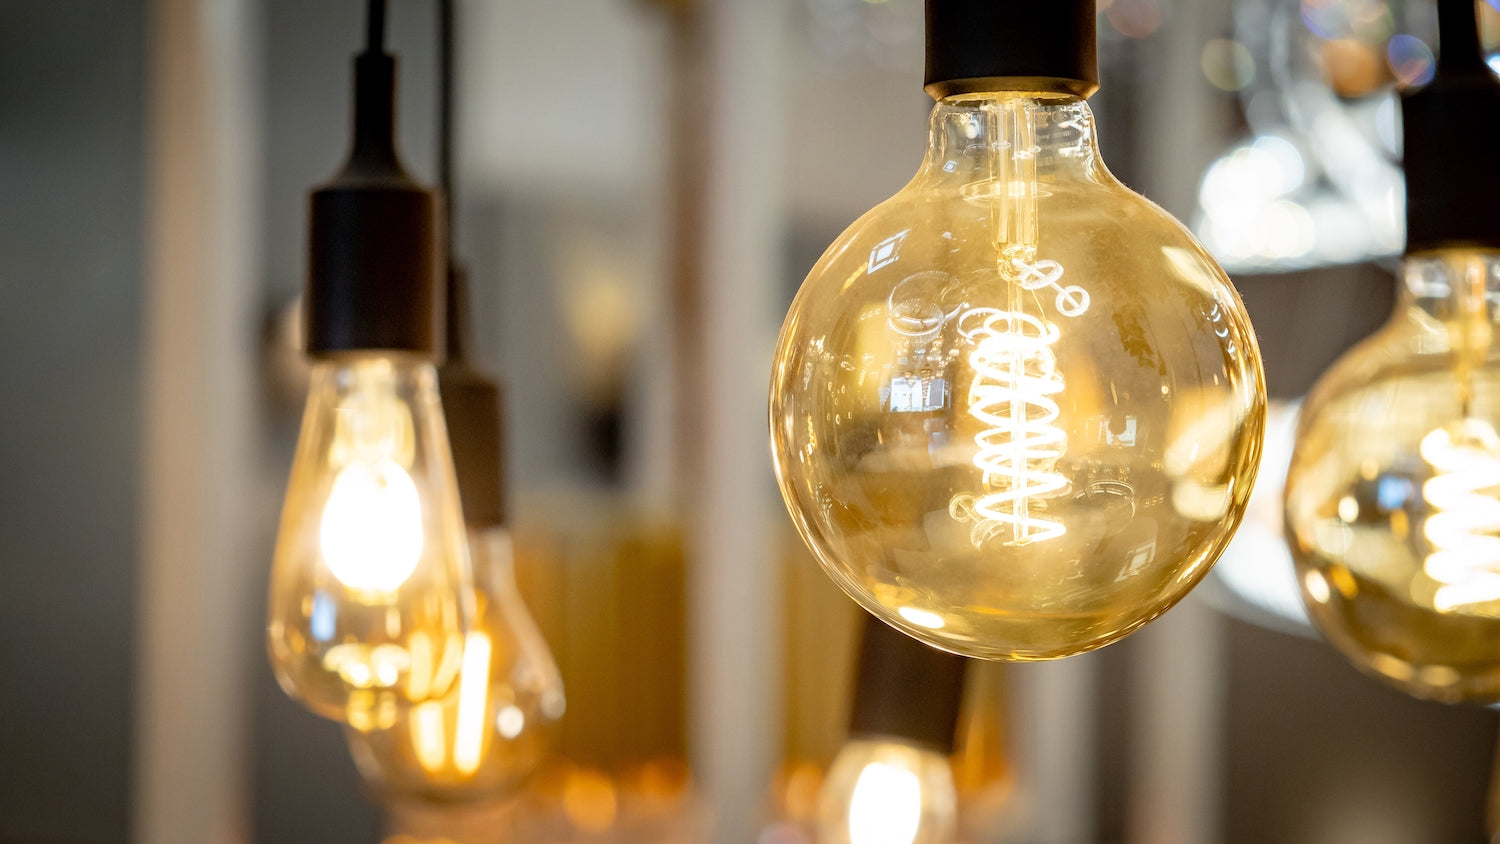 Everything you need to know about vintage LED light bulbs